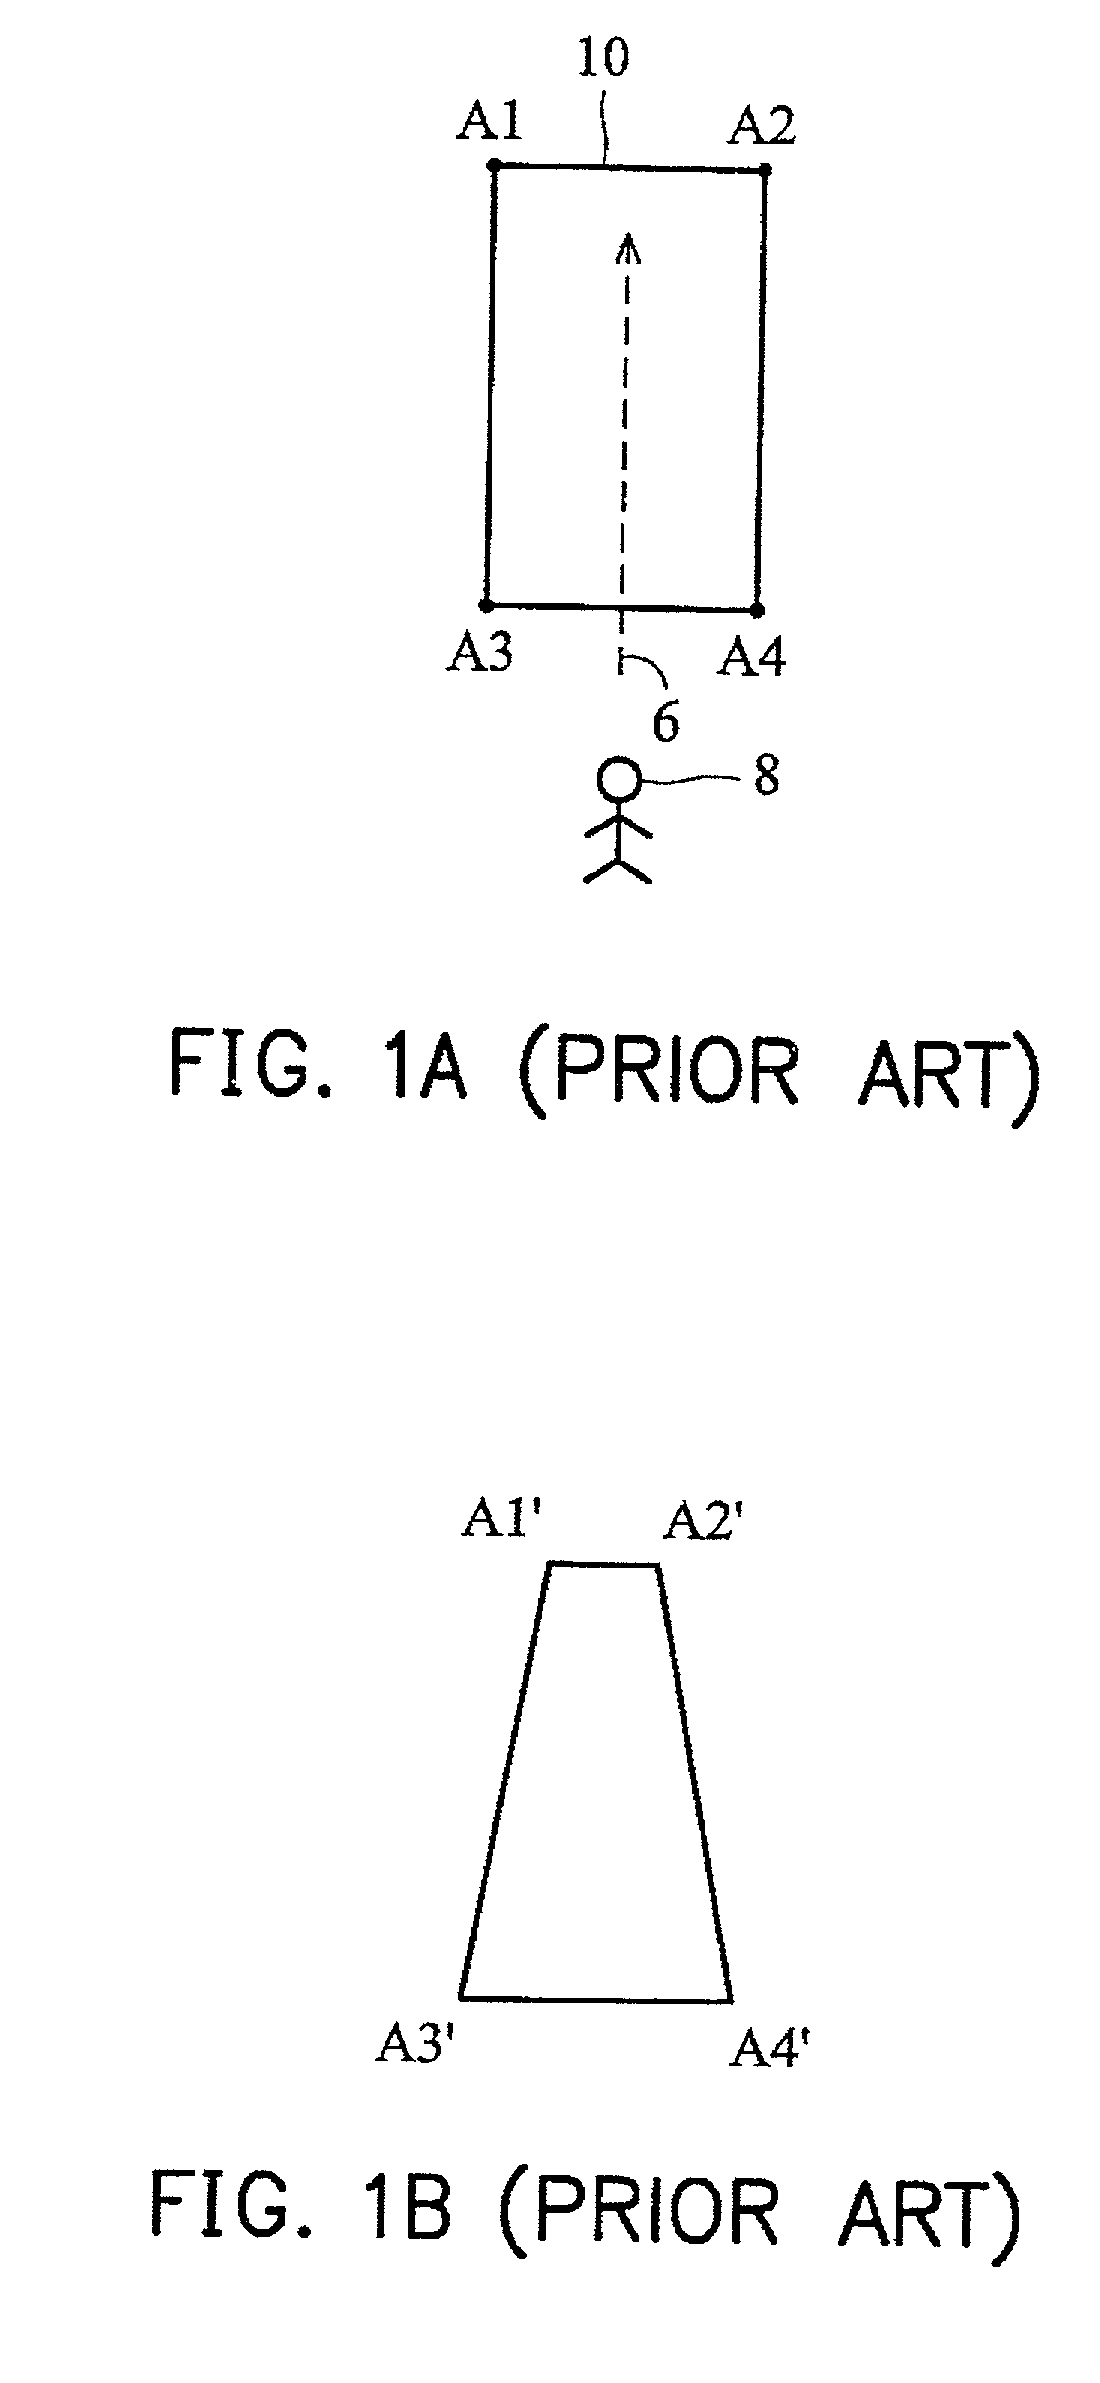 Method of correcting an image with perspective distortion and producing an artificial image with perspective distortion